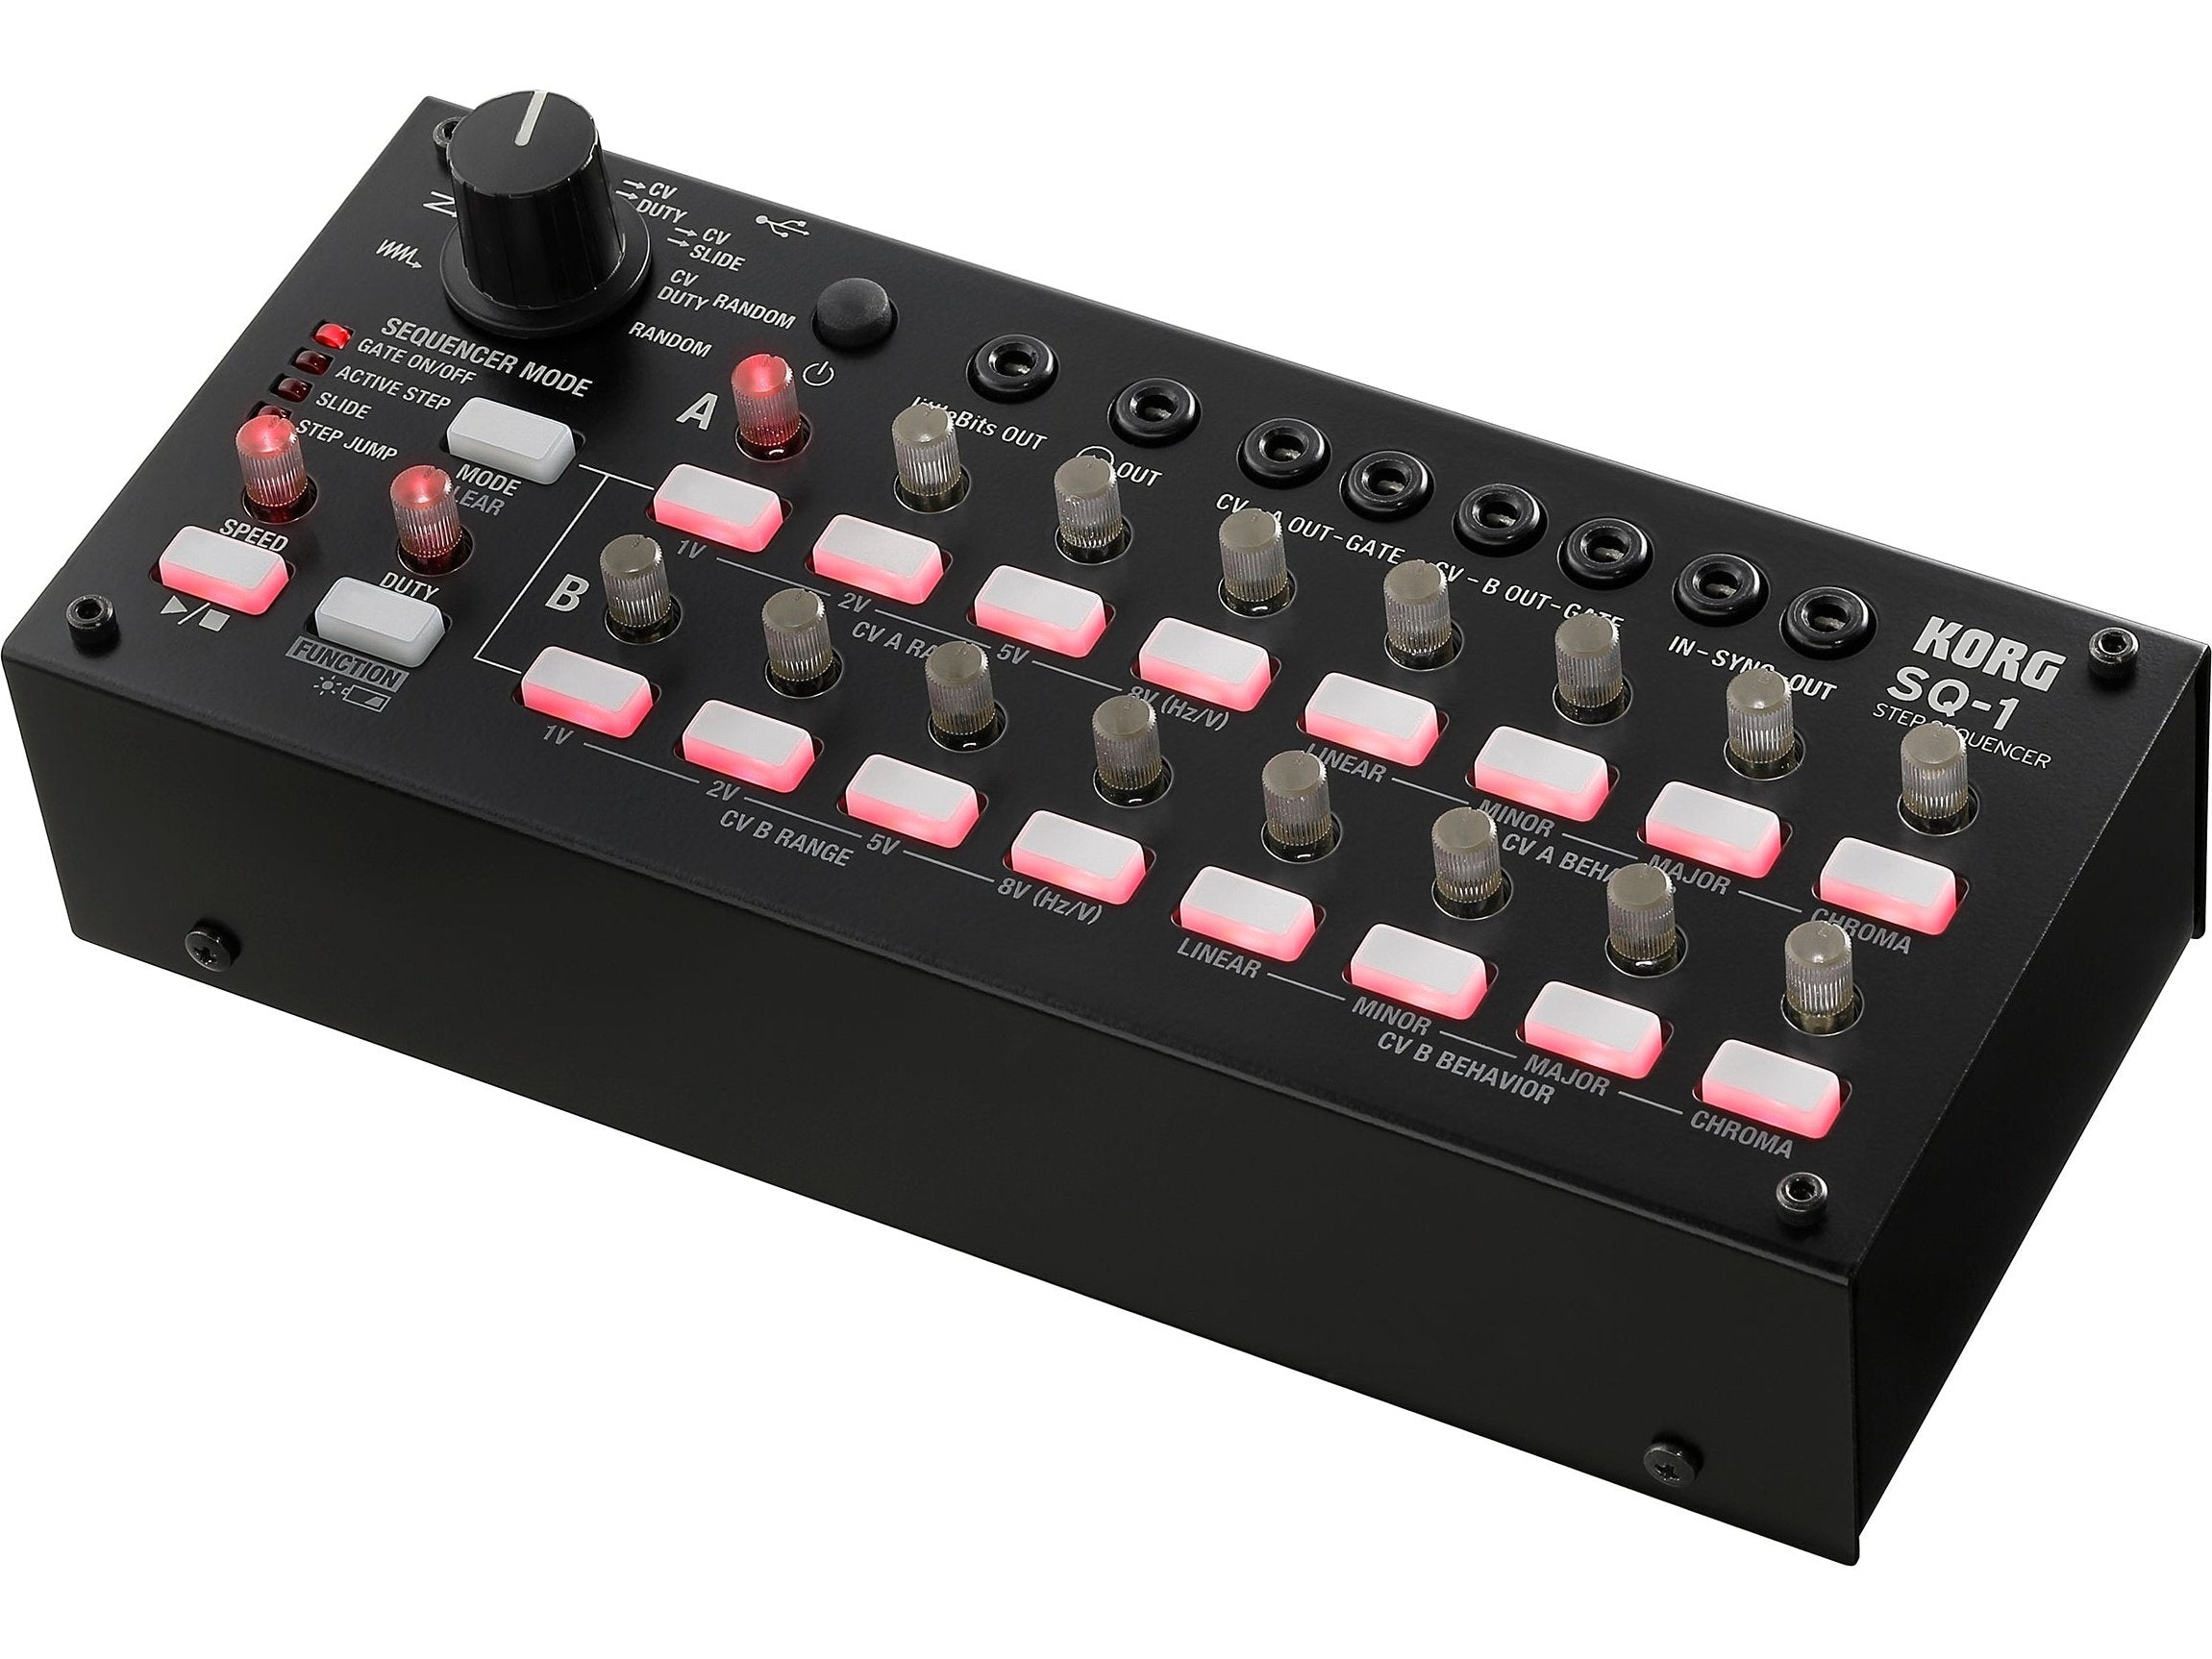 SQ-1 - Step Sequencer